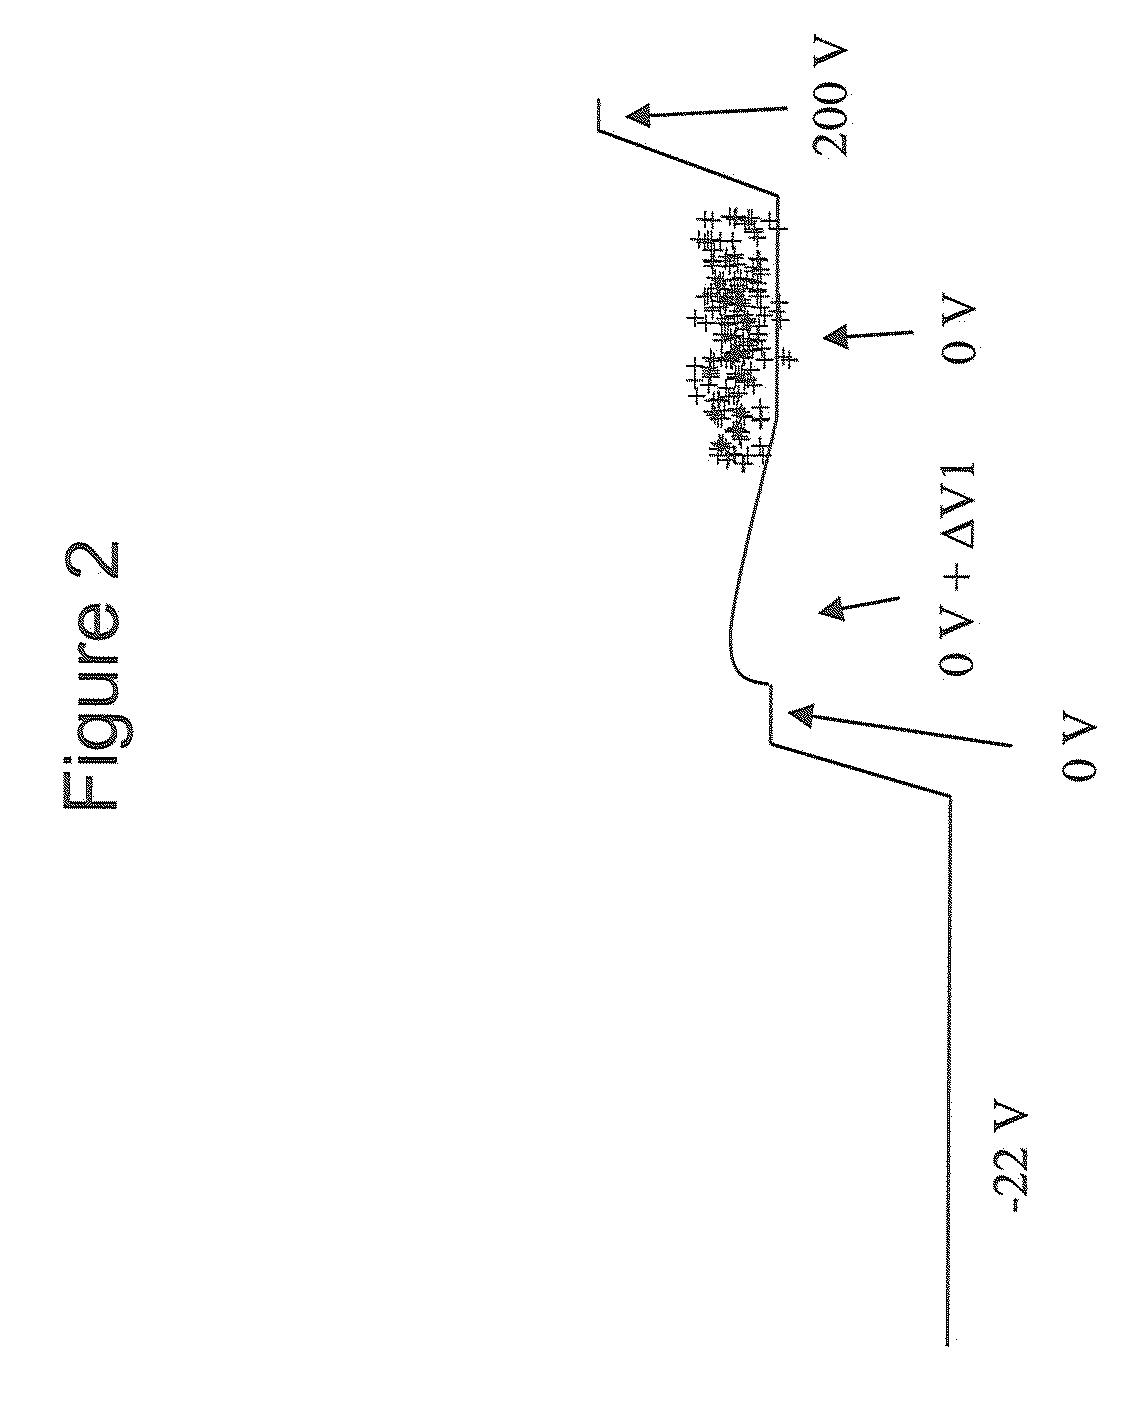 Method and apparatus for reducing space charge in an ion trap